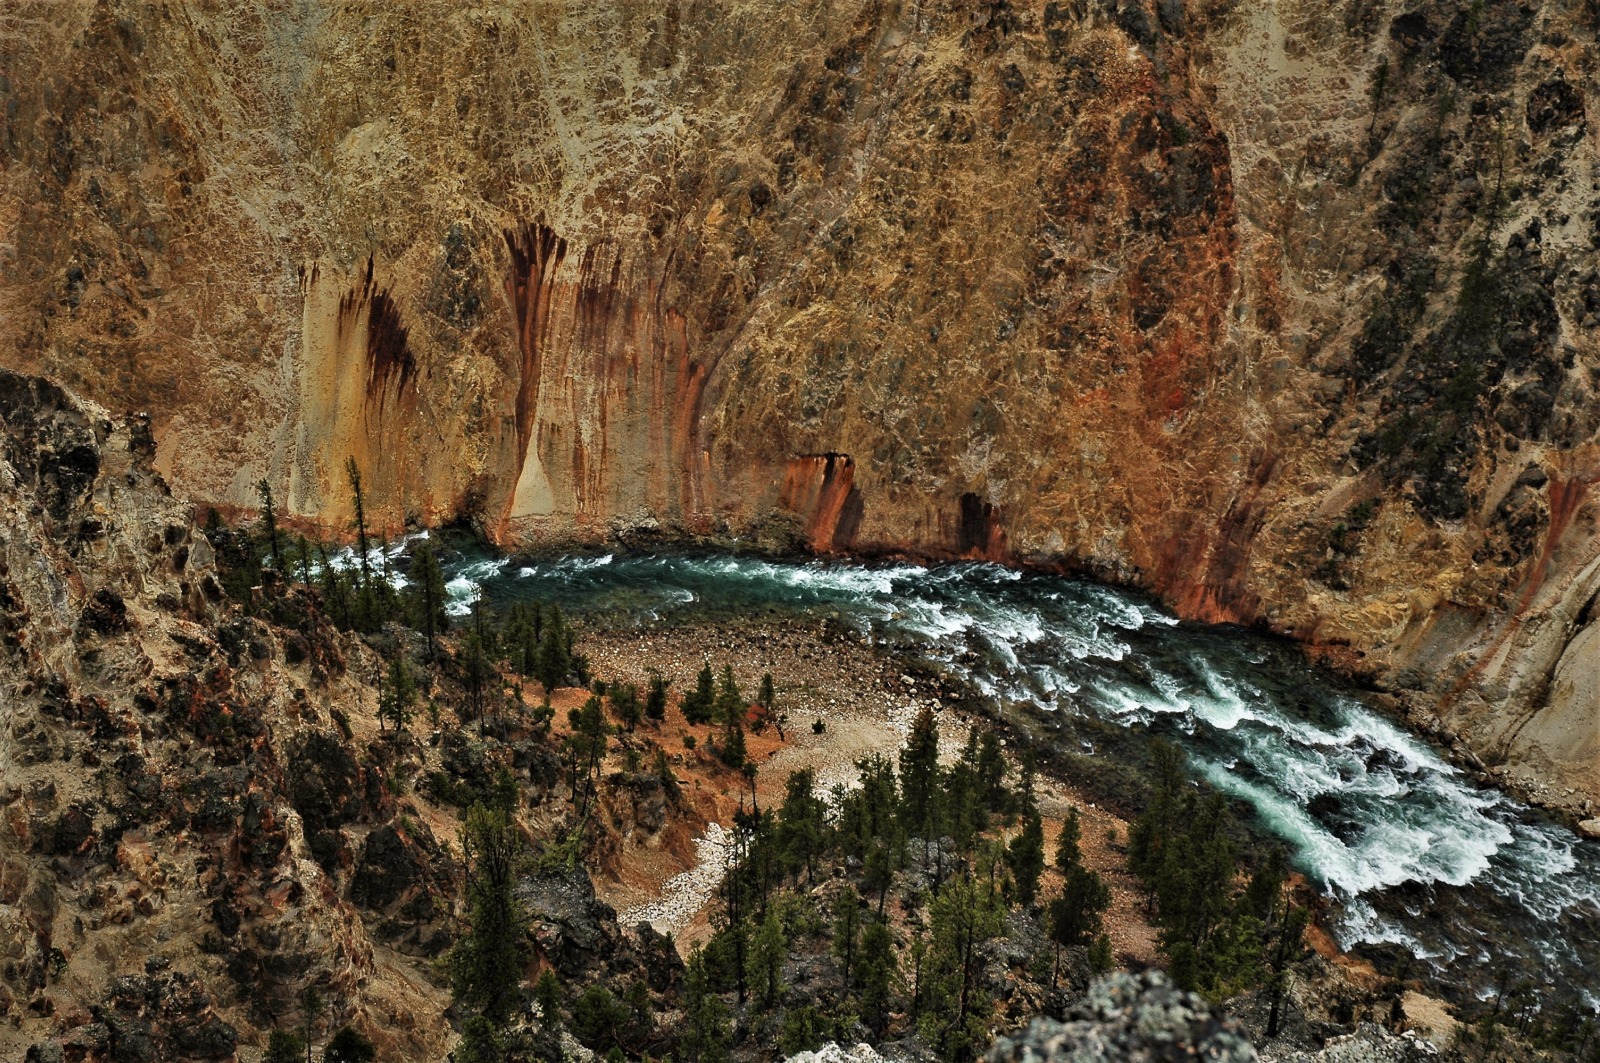 Aerial view of a whitewater river with a slight curve to the left at the bottom of a deep, steep canyon